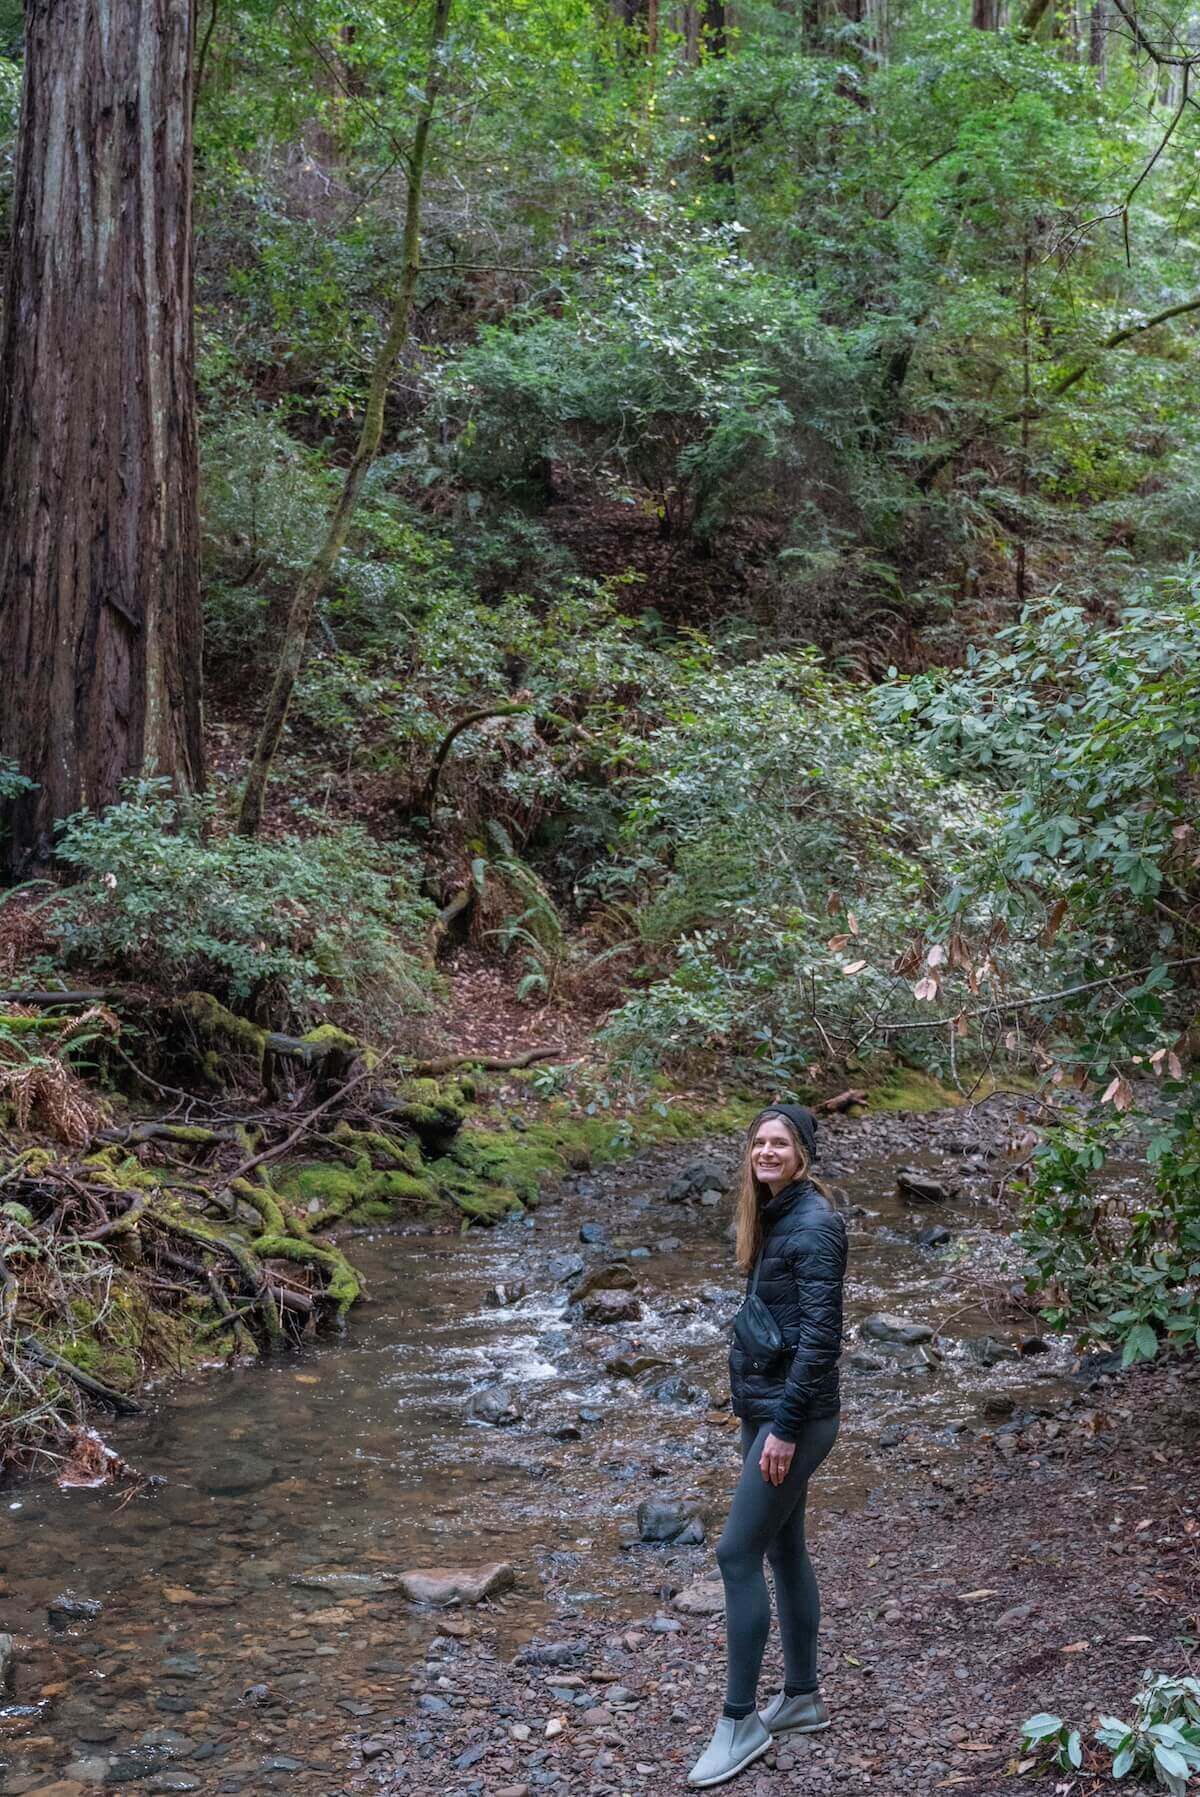 A woman in dark clothing standing beside a creek in Muir Woods, surrounded by towering redwoods.